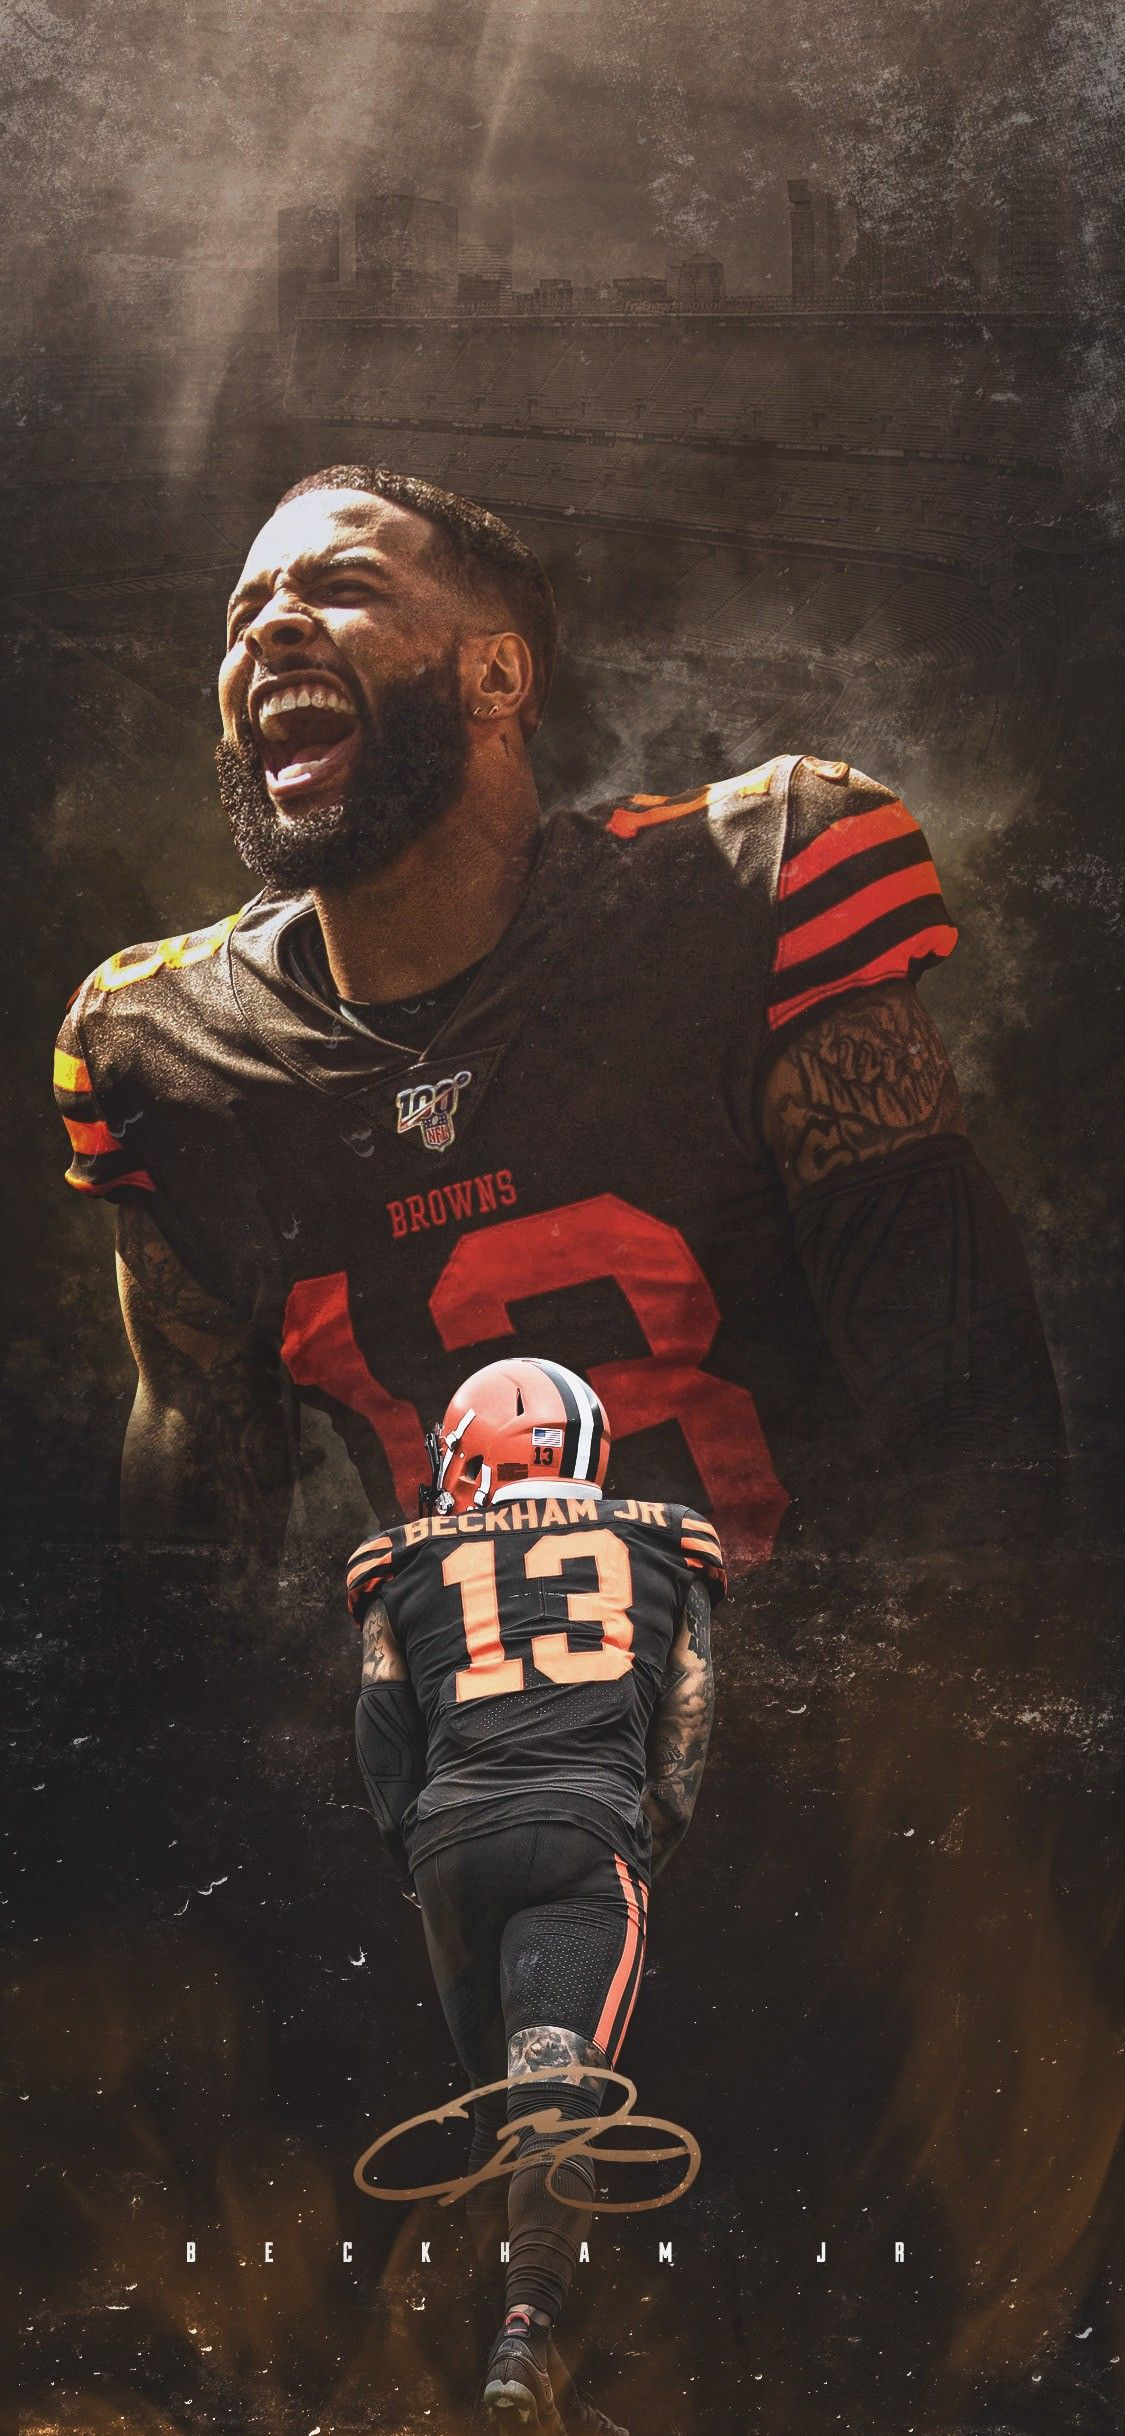 1125x2436 Pin by Karl Orpin on NFL | Nfl football wallpaper, Odell beckham jr wallpapers, Football wallpaper